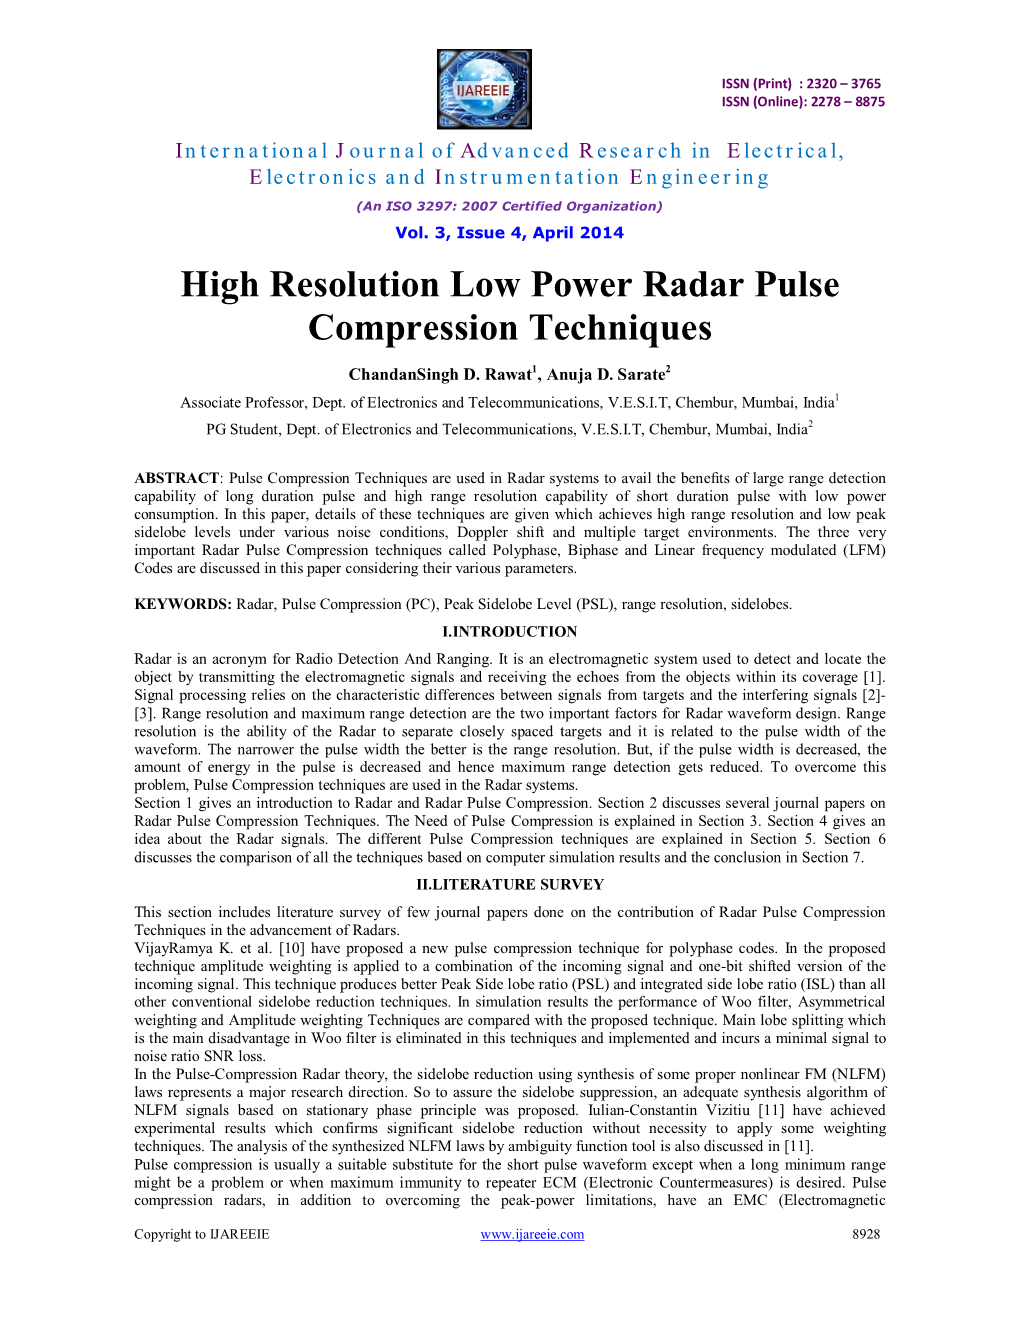 High Resolution Low Power Radar Pulse Compression Techniques